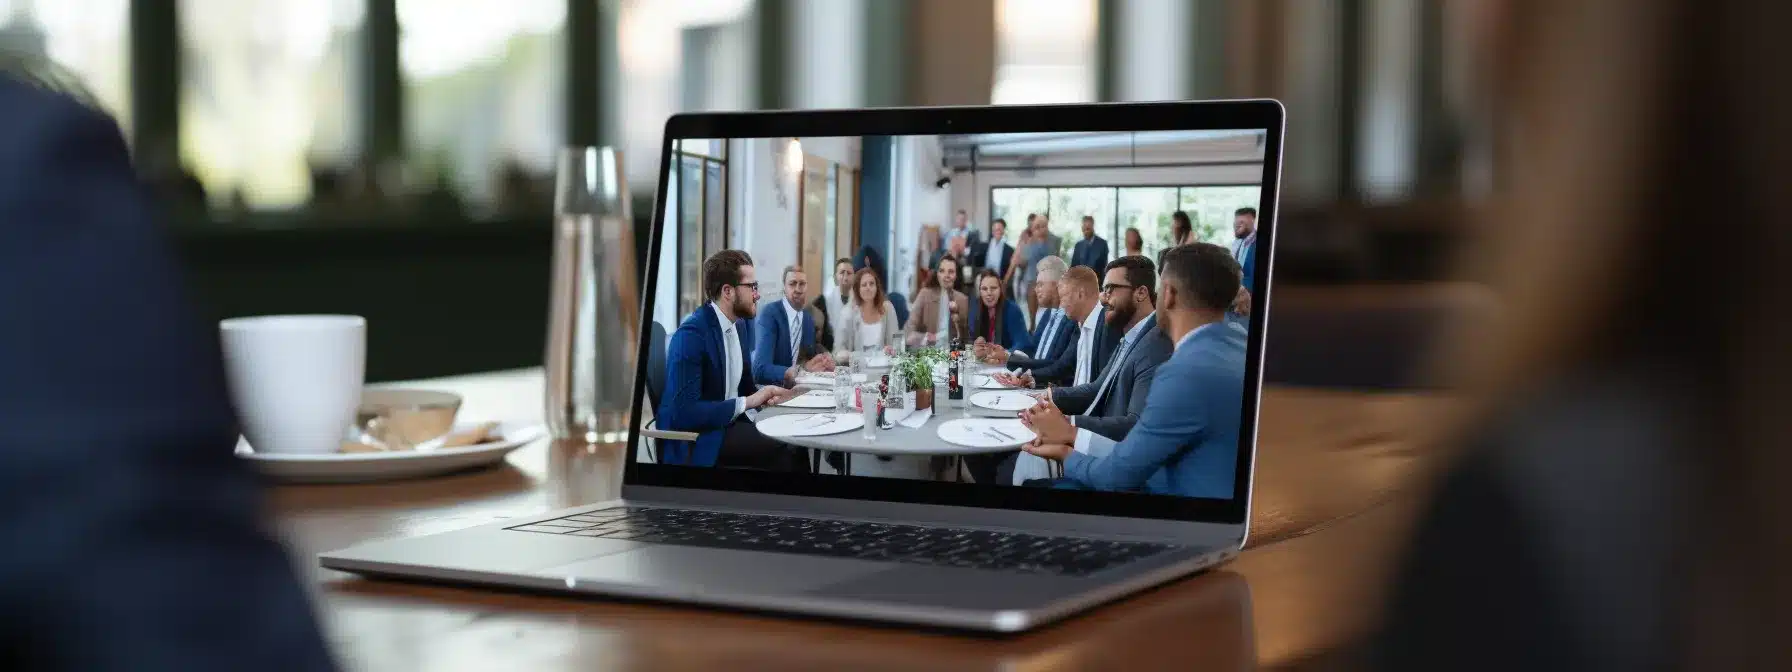 A Laptop With A Well-Designed Website Displayed On Its Screen, Surrounded By A Group Of Businessmen Discussing Marketing Strategies.